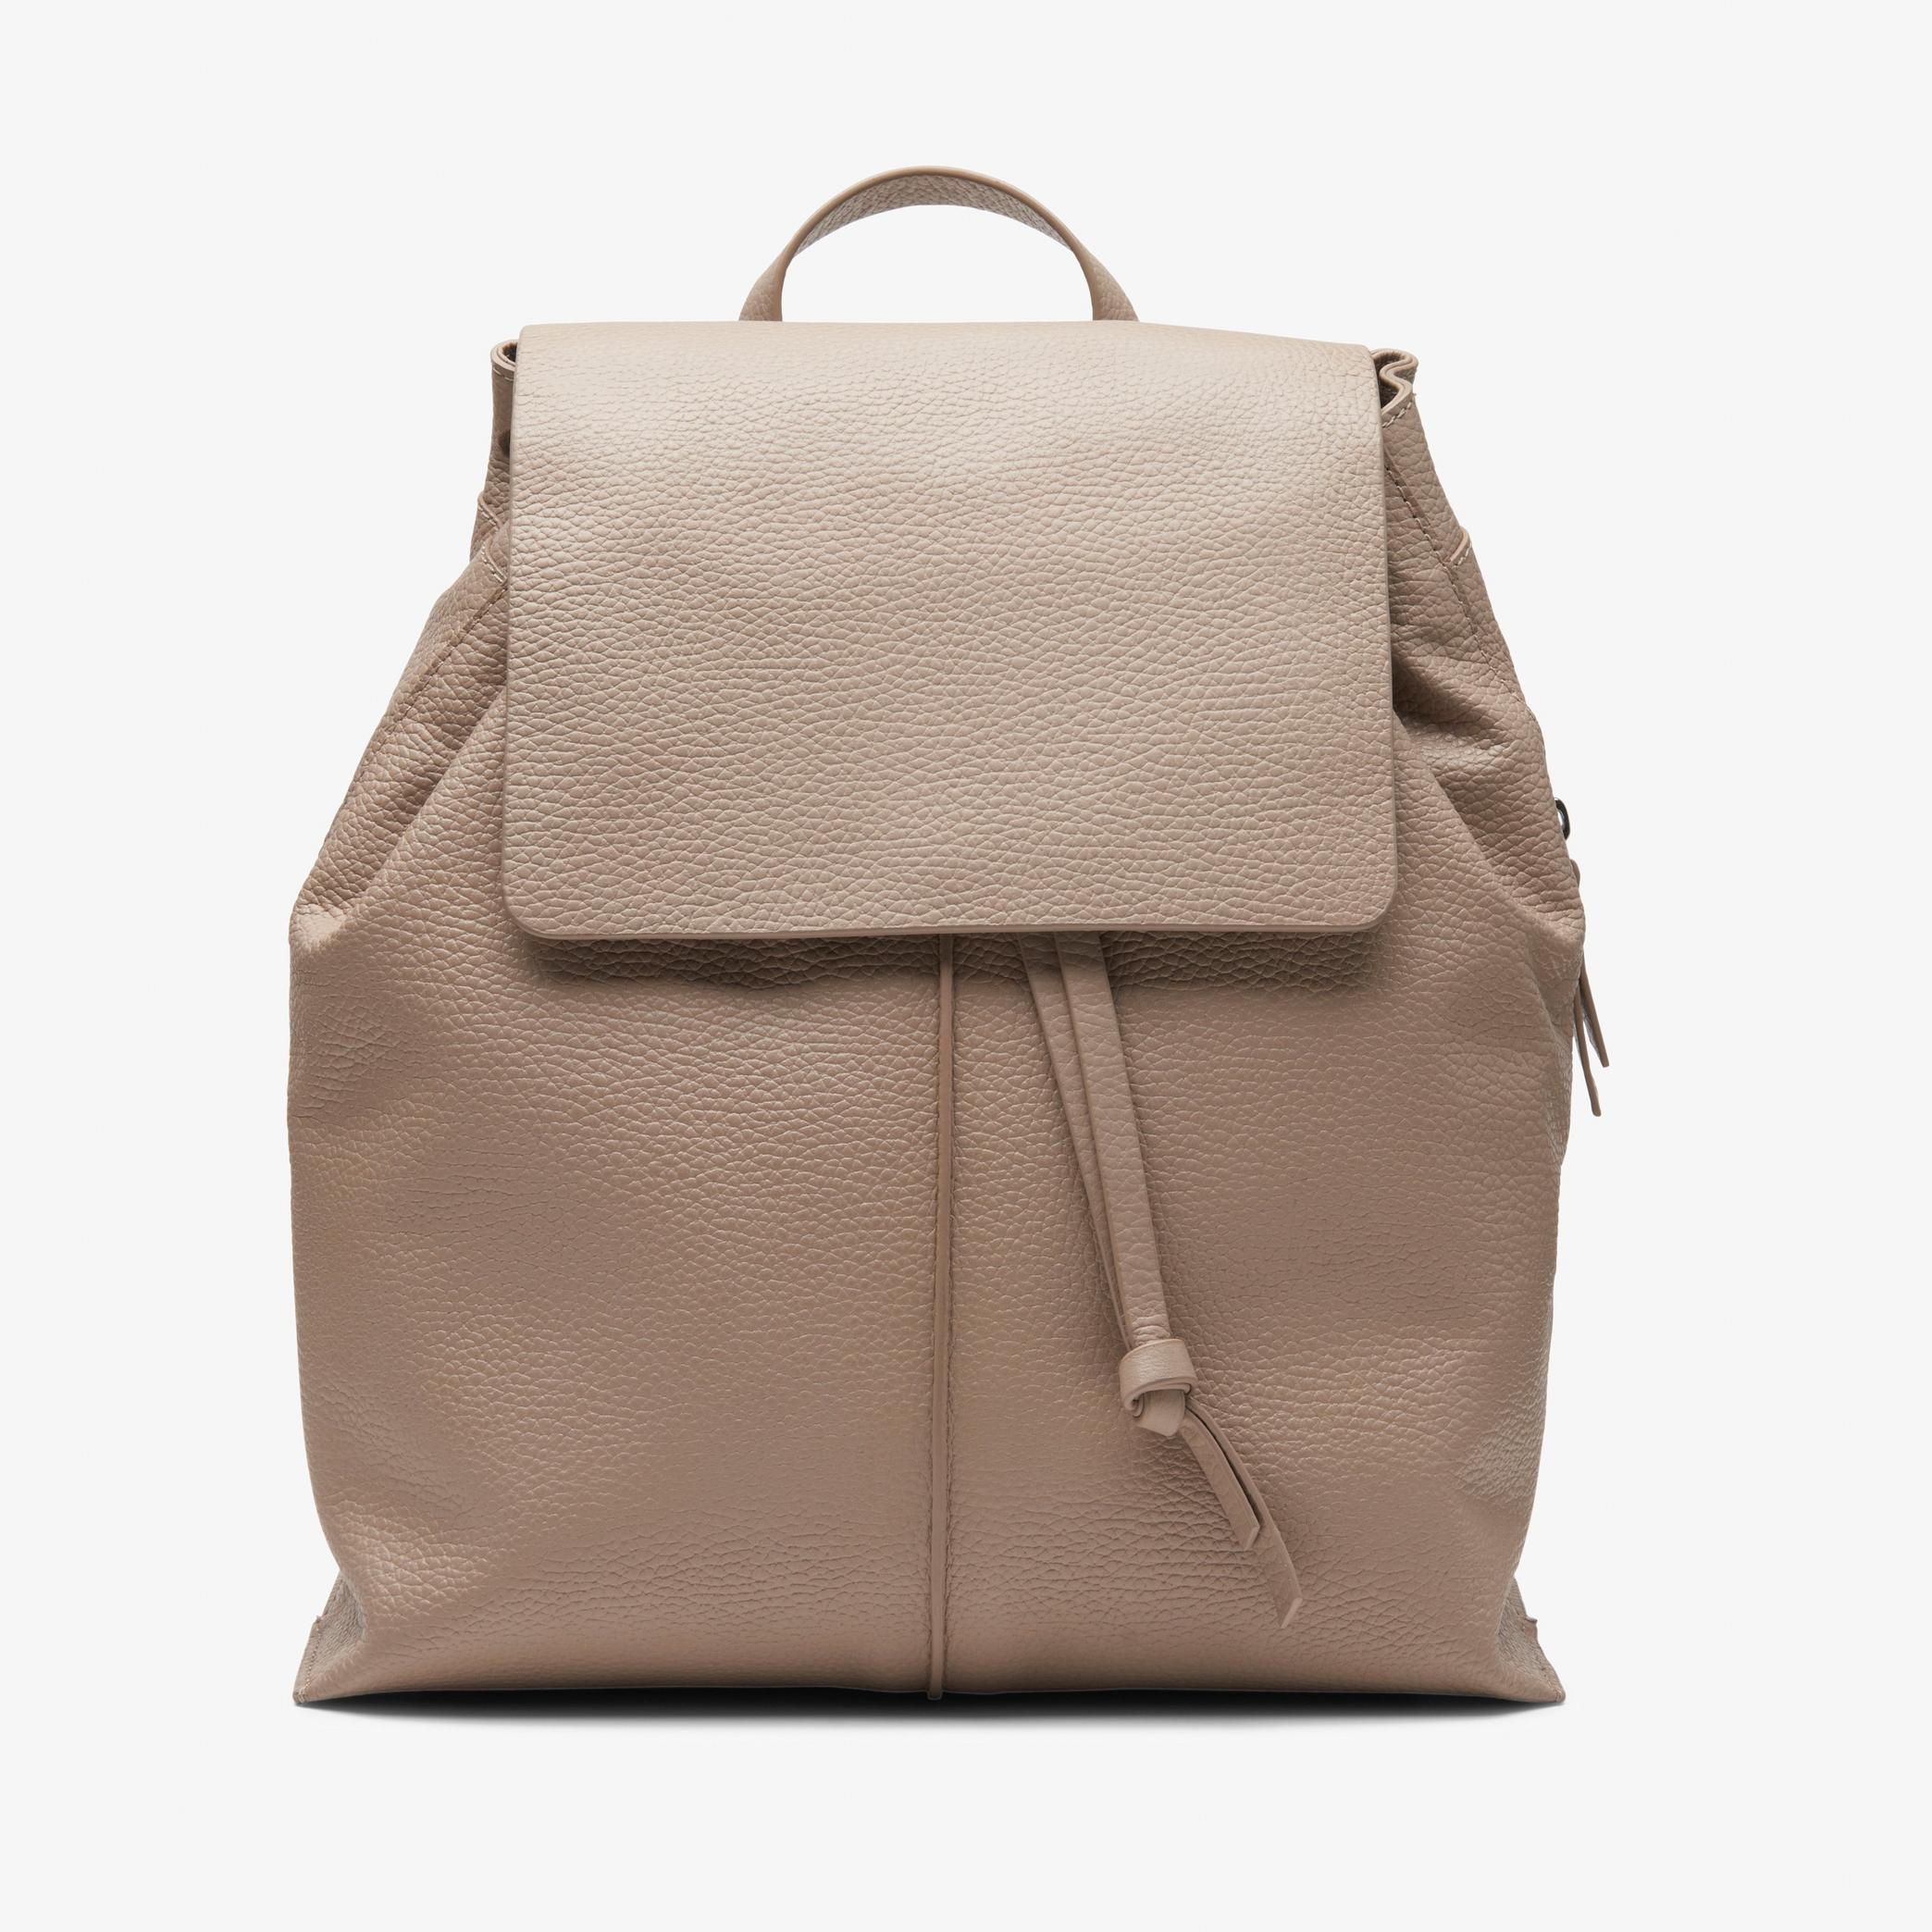 Raelyn Tie Sand Leather Backpack, view 1 of 4